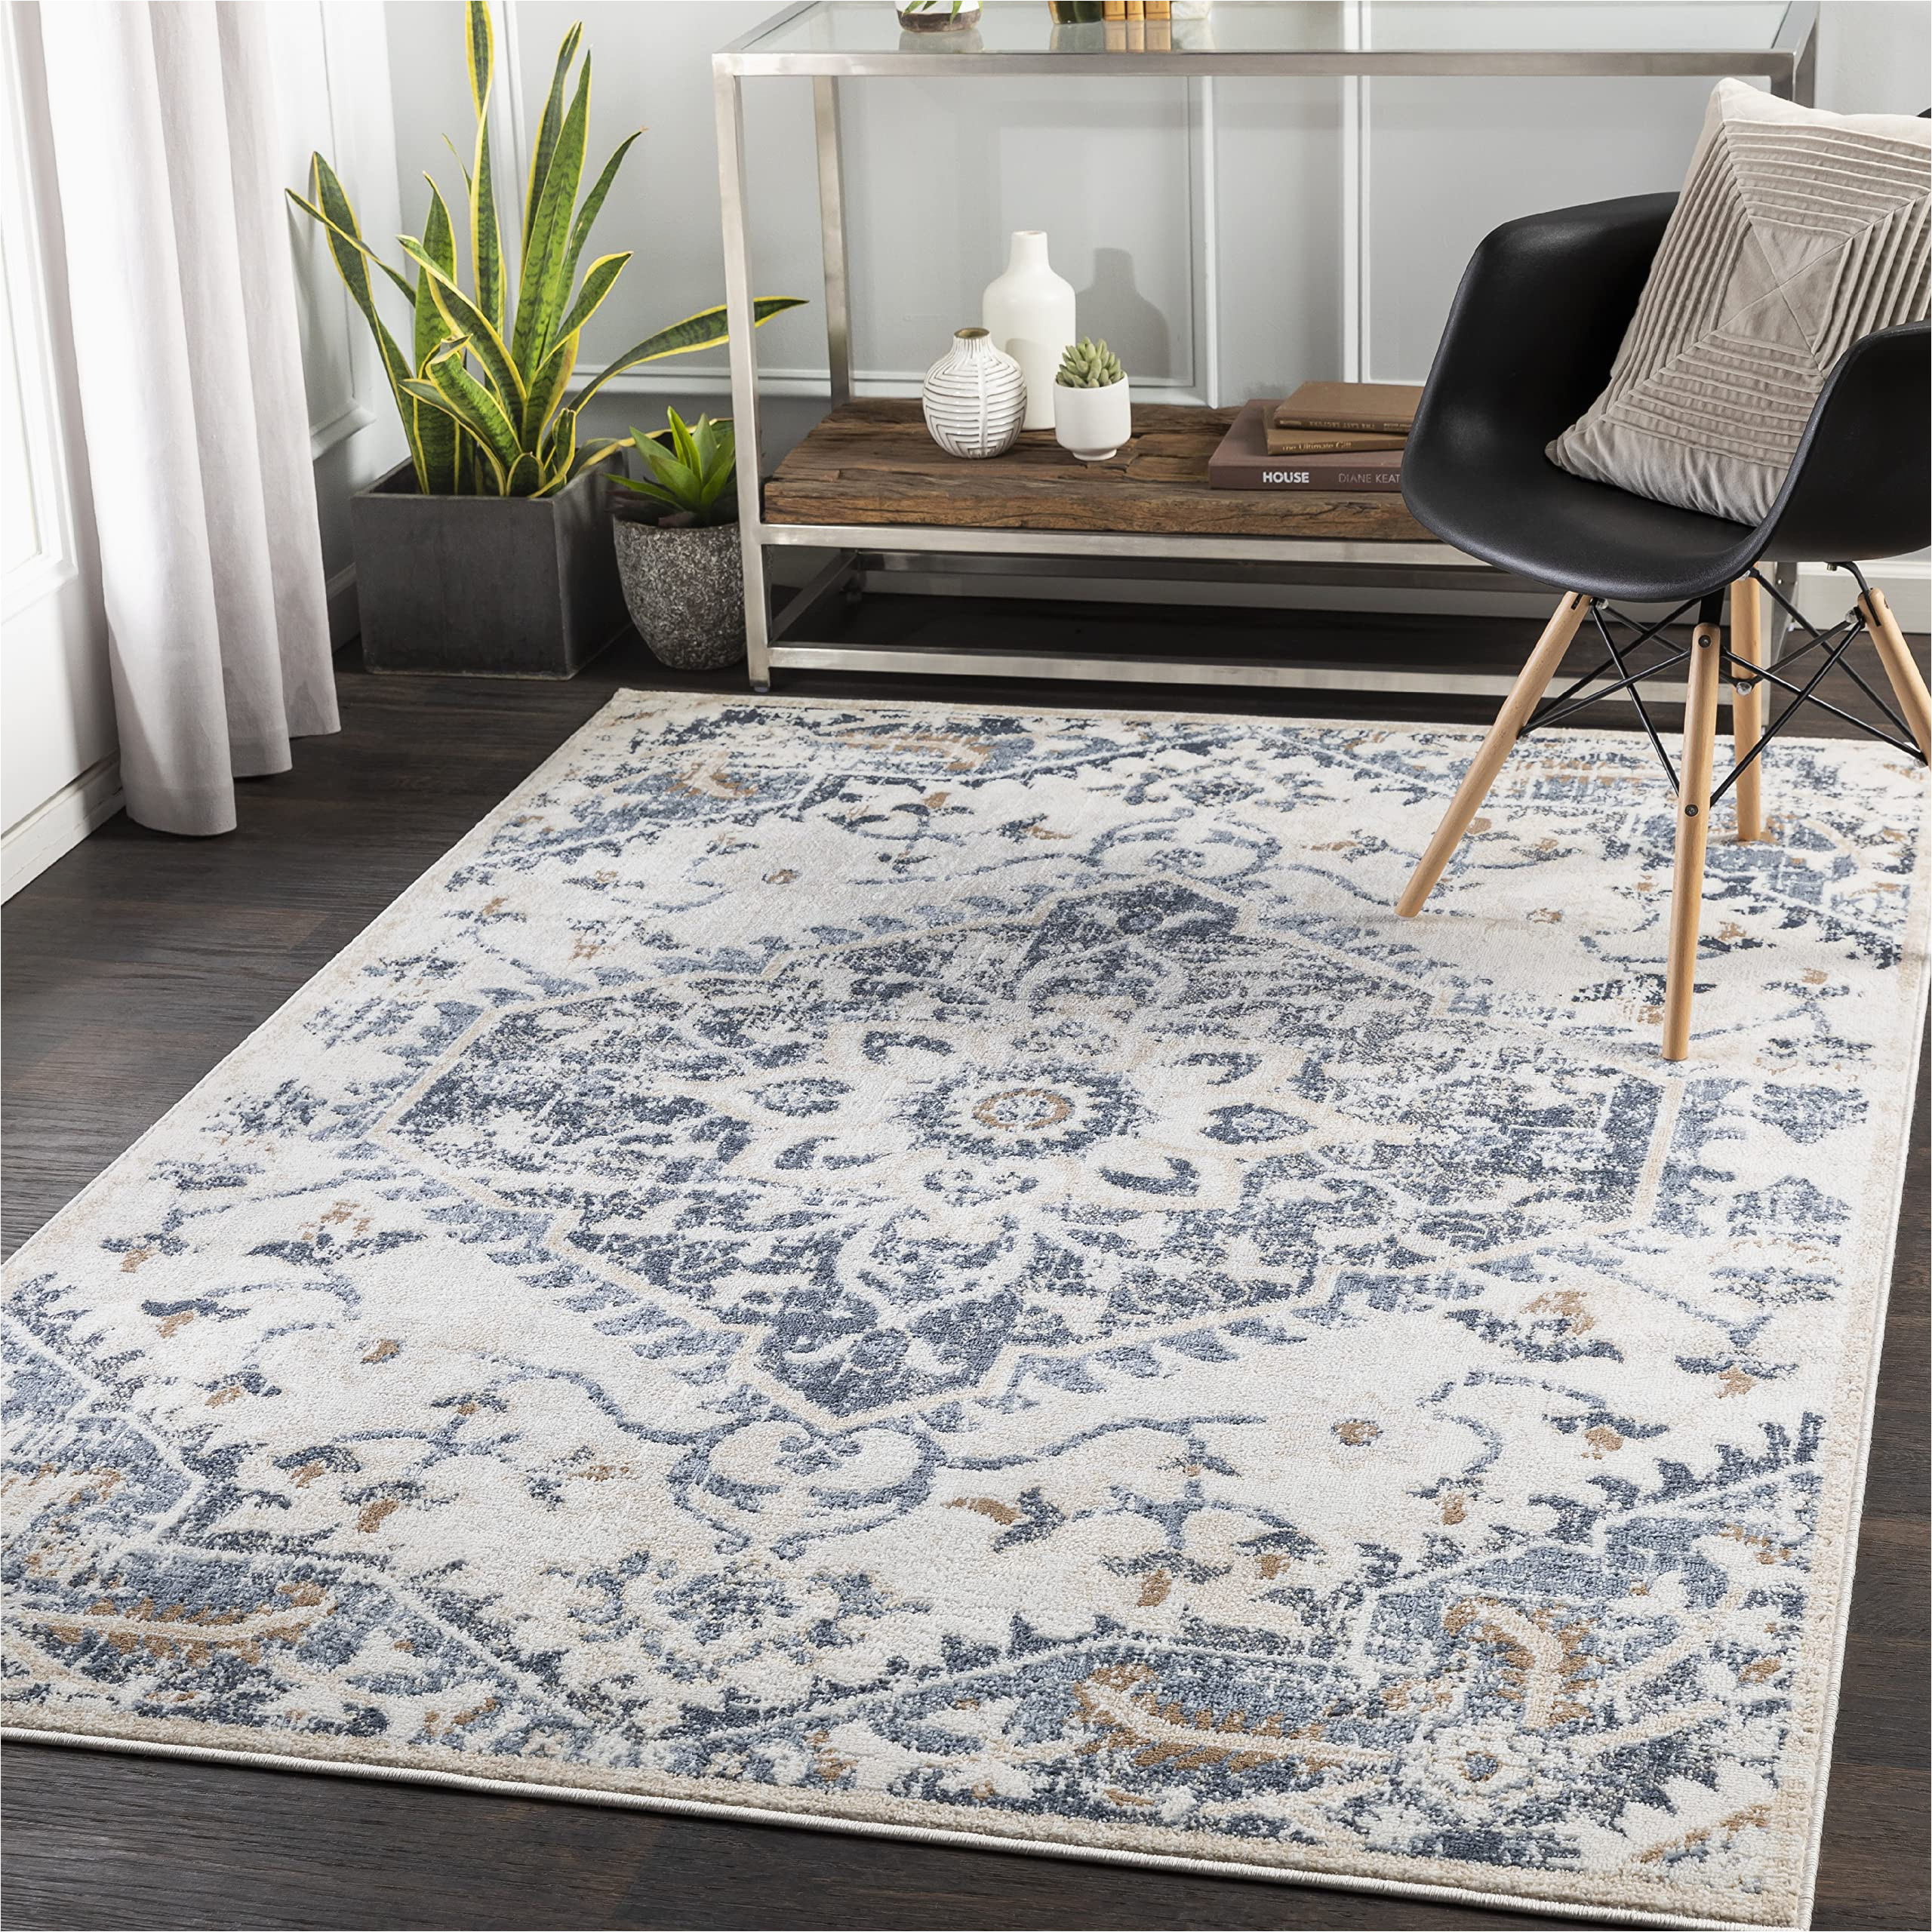 Grey Cream and Blue area Rugs Mark&day area Rugs, 5×7 Baflo Traditional Denim area Rug, Blue / Cream / Brown Carpet for Living Room, Bedroom or Kitchen (5’2″ X 7′)